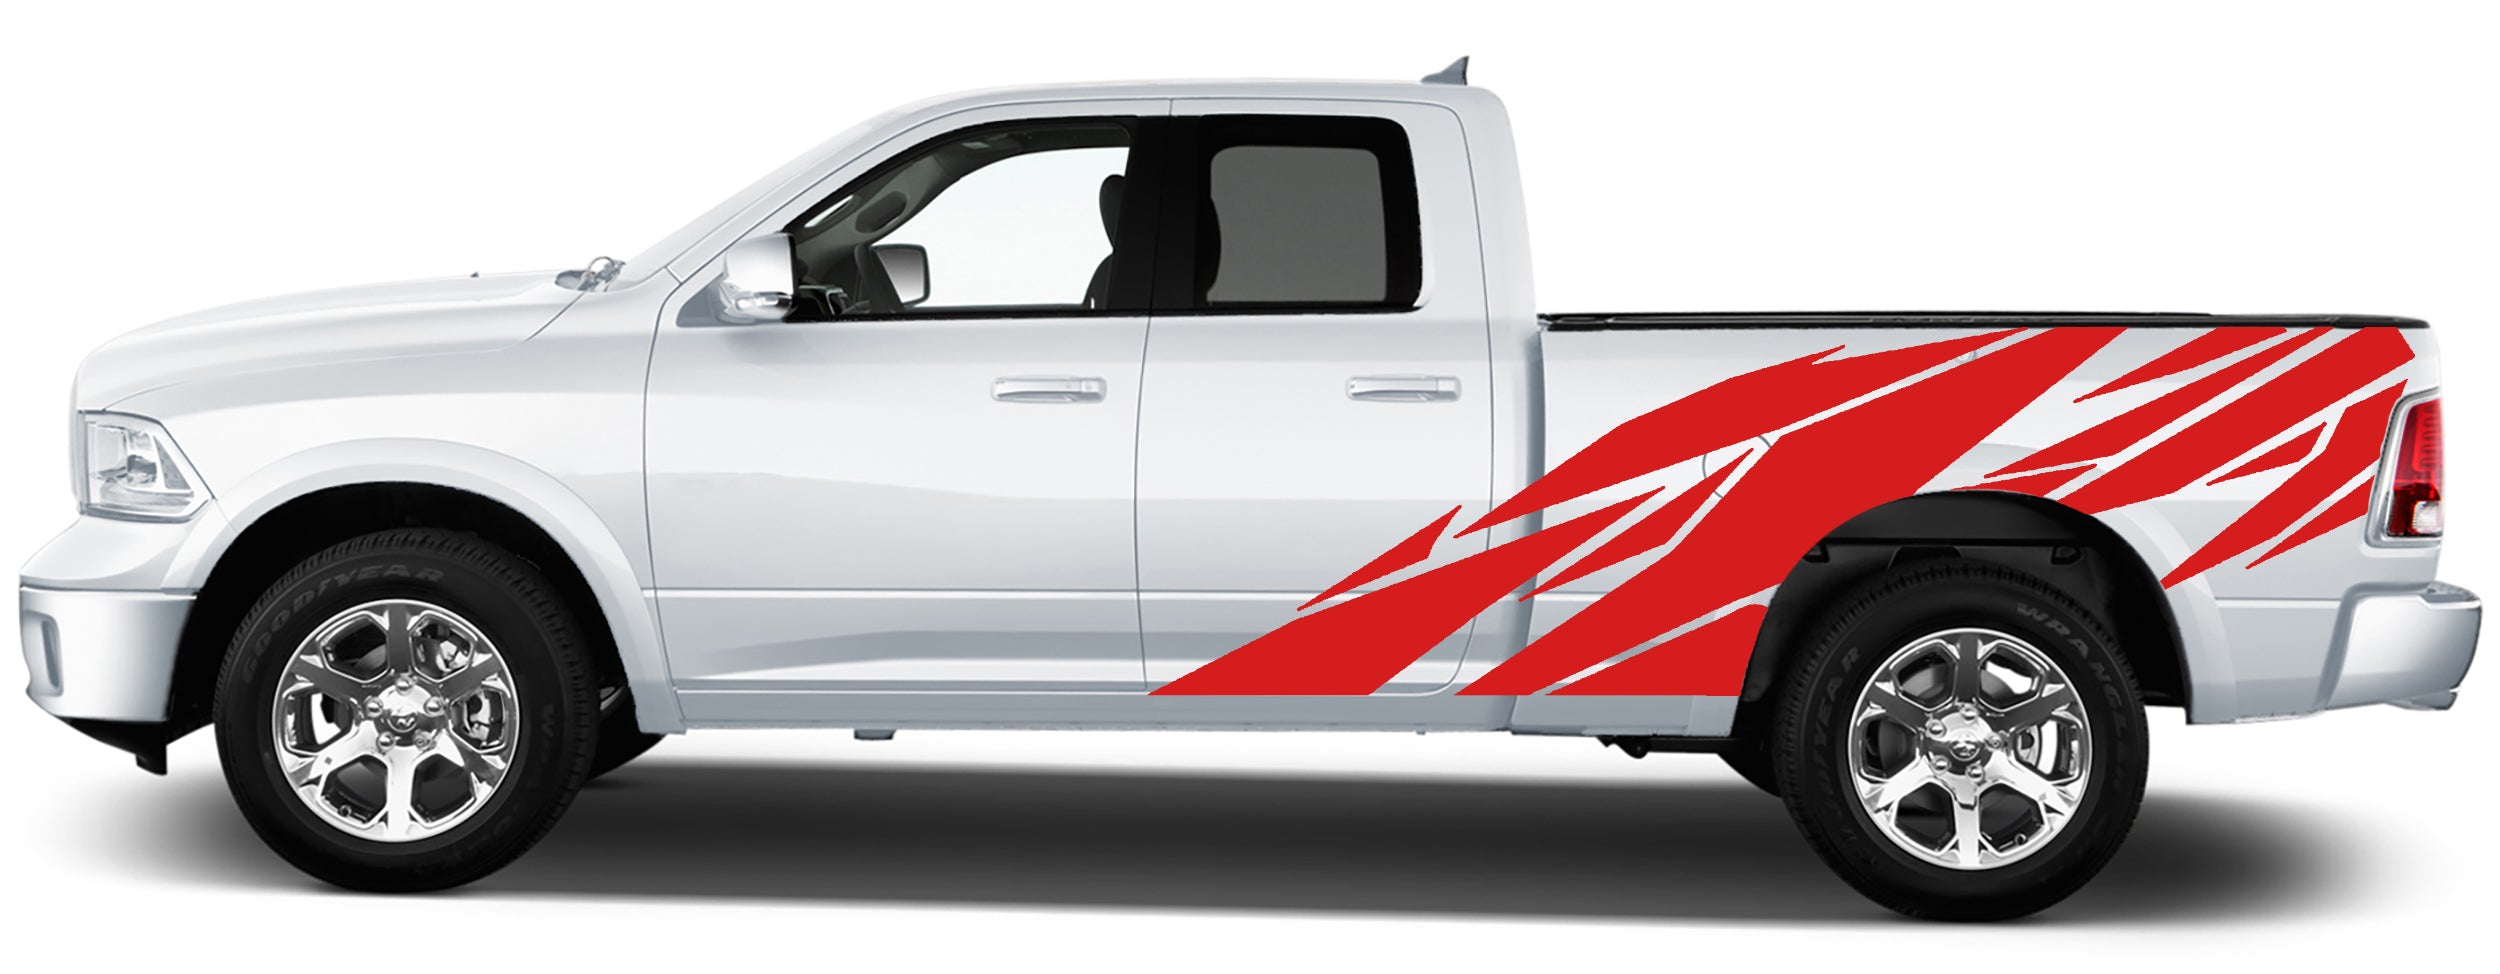 geometric side graphics for dodge ram 2008 to 2018 models red